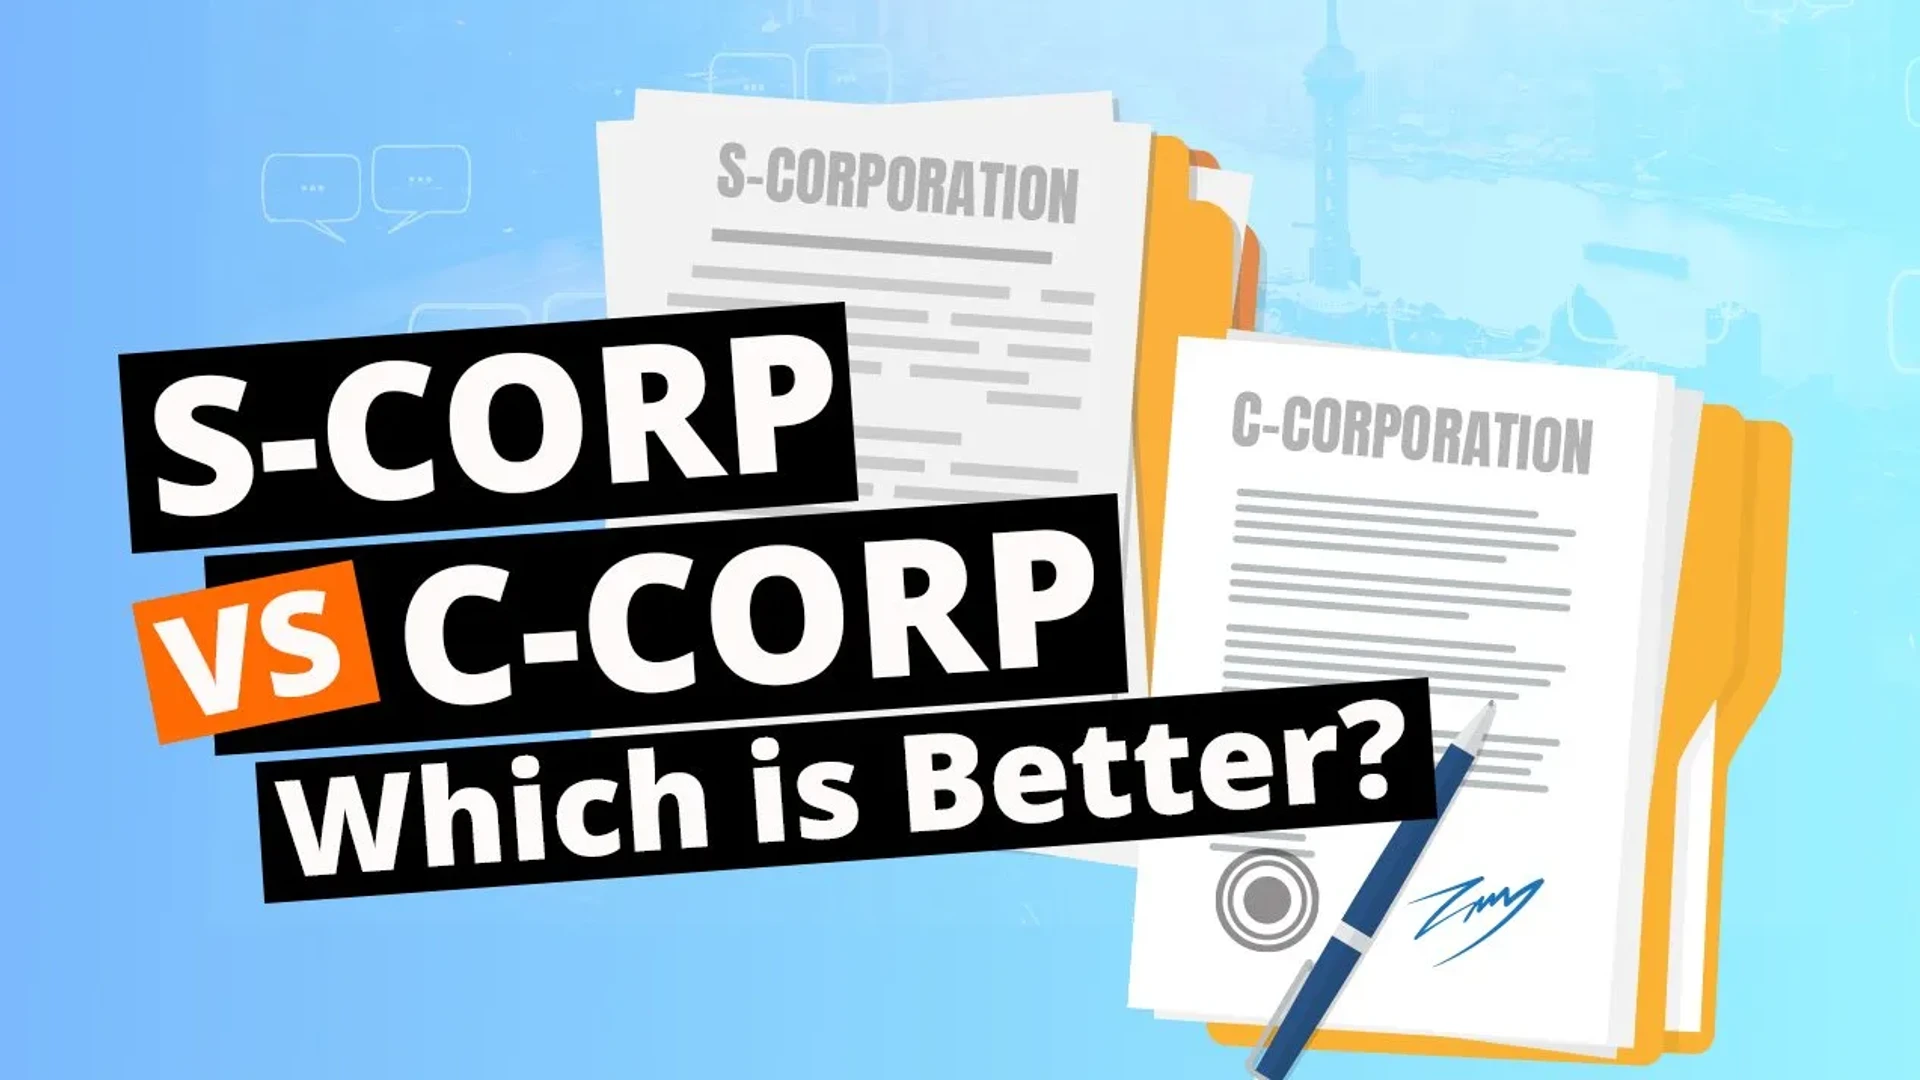 S Corp vs. C Corp: What Are the Differences and Benefits?